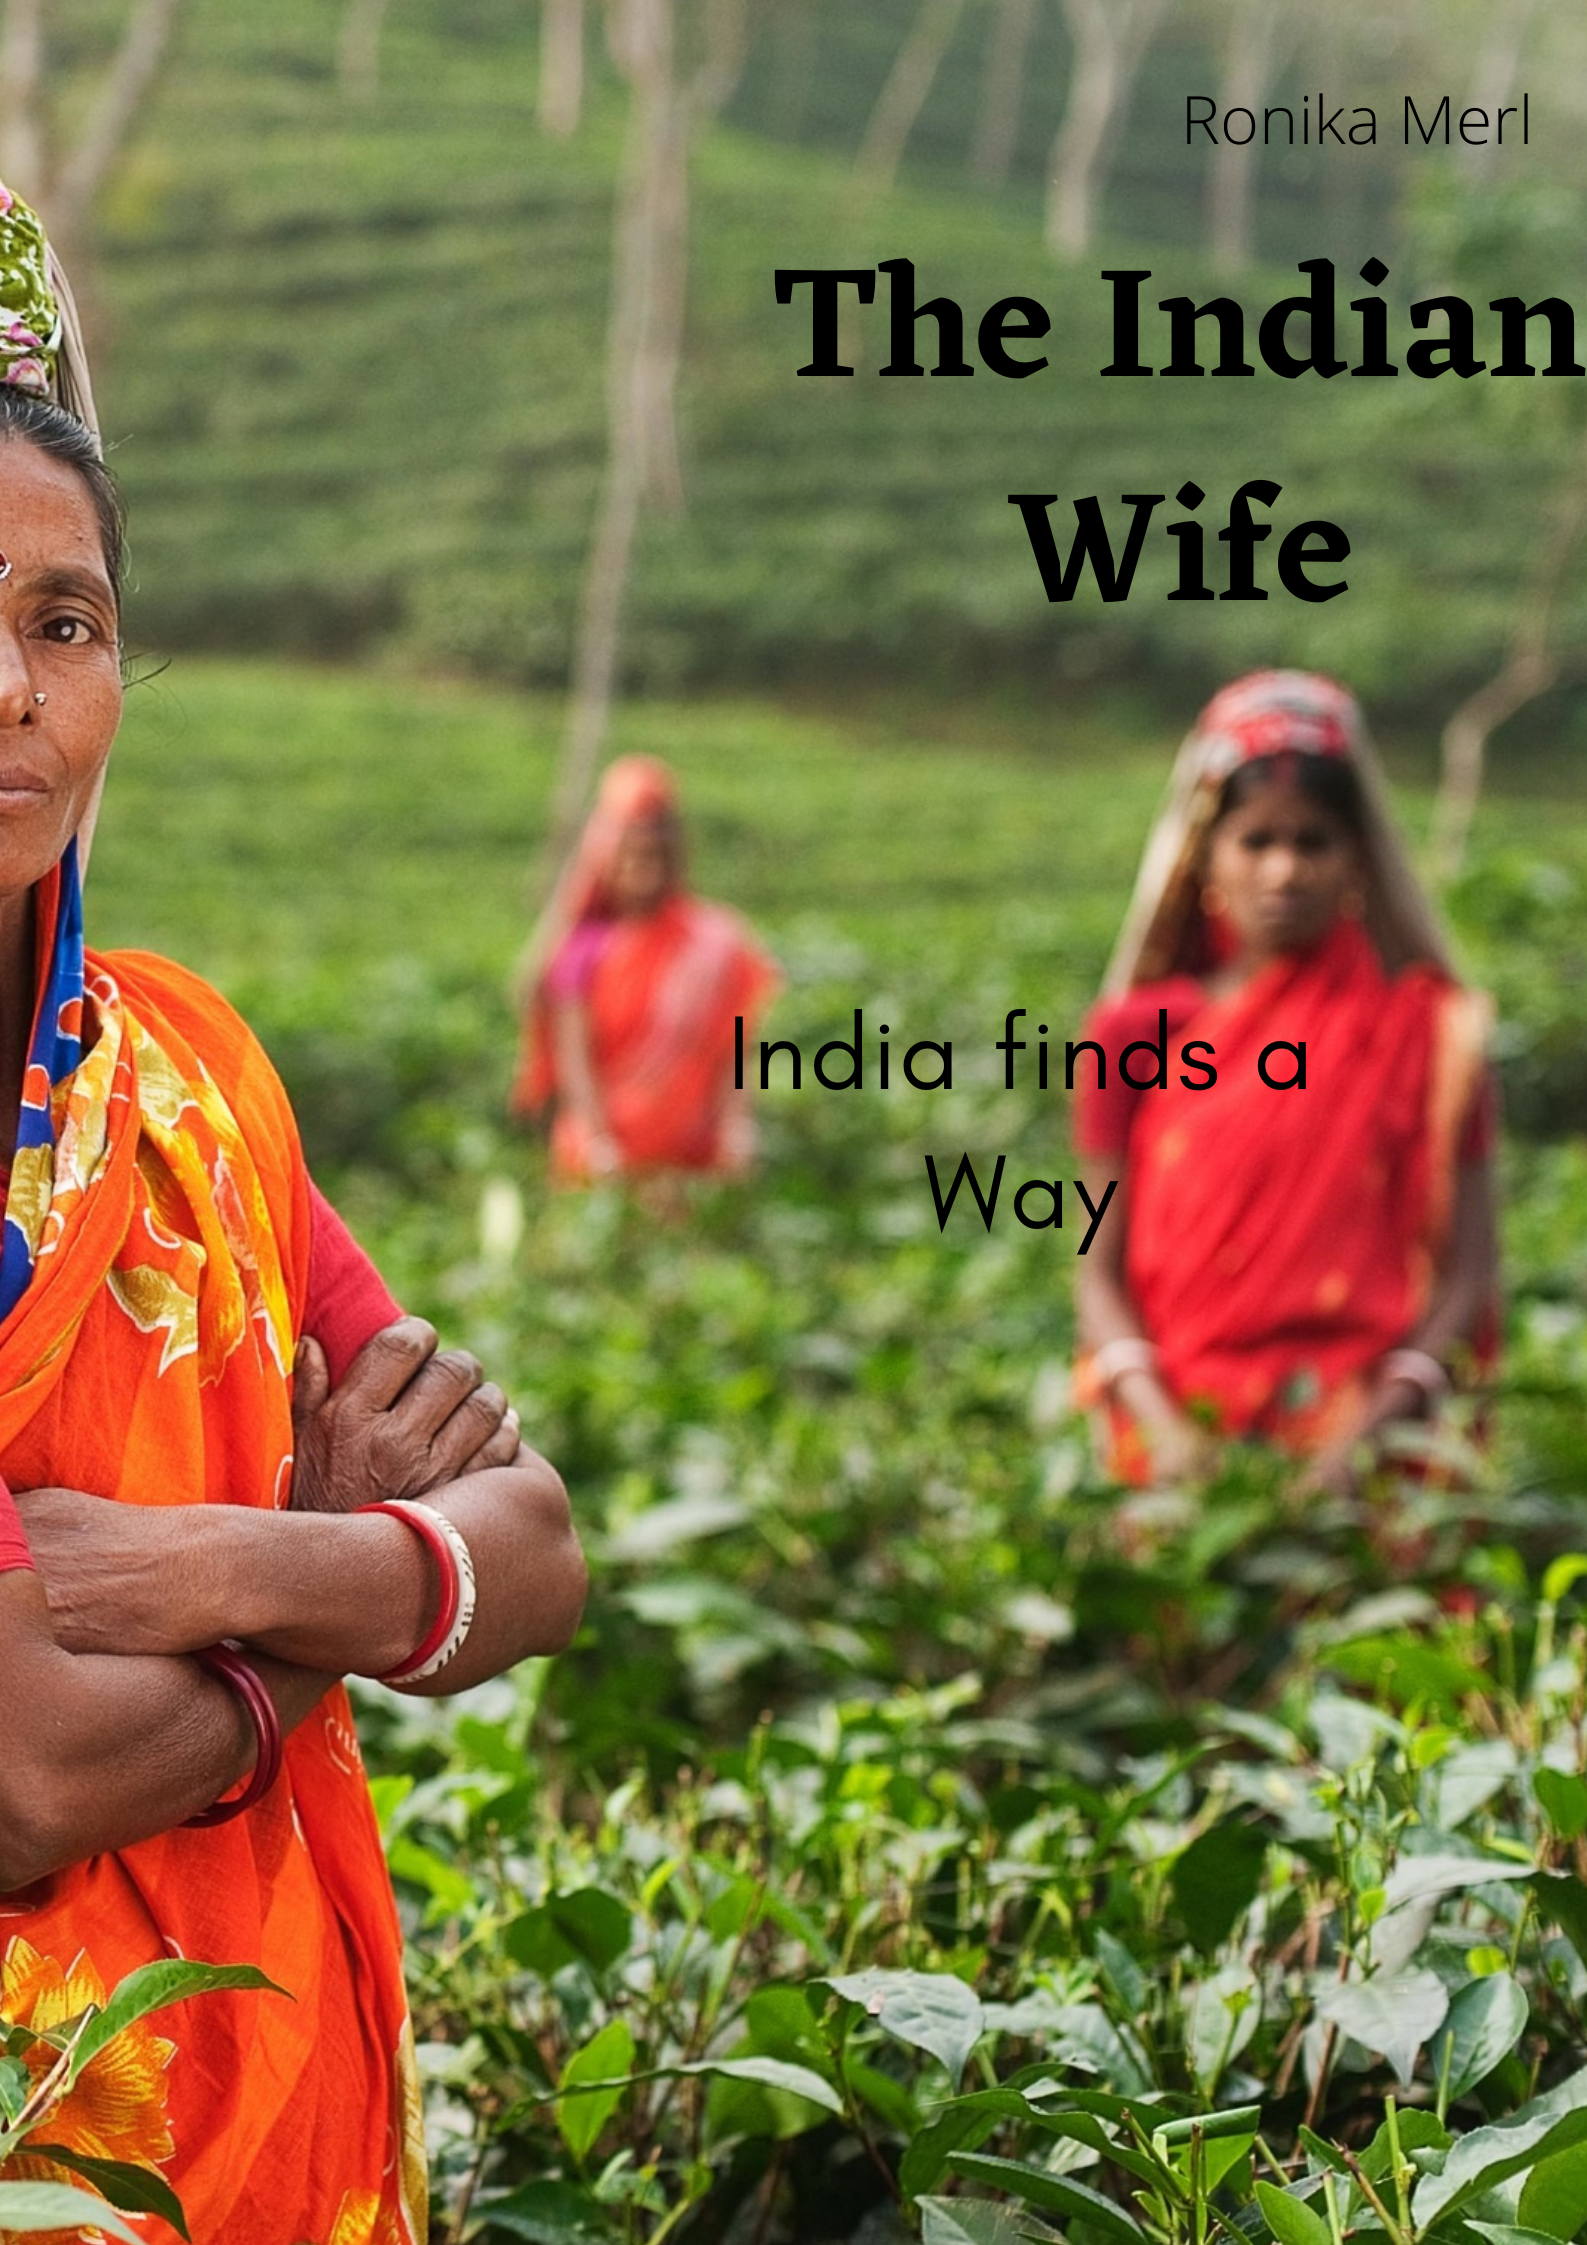 THE INDIAN WIFE